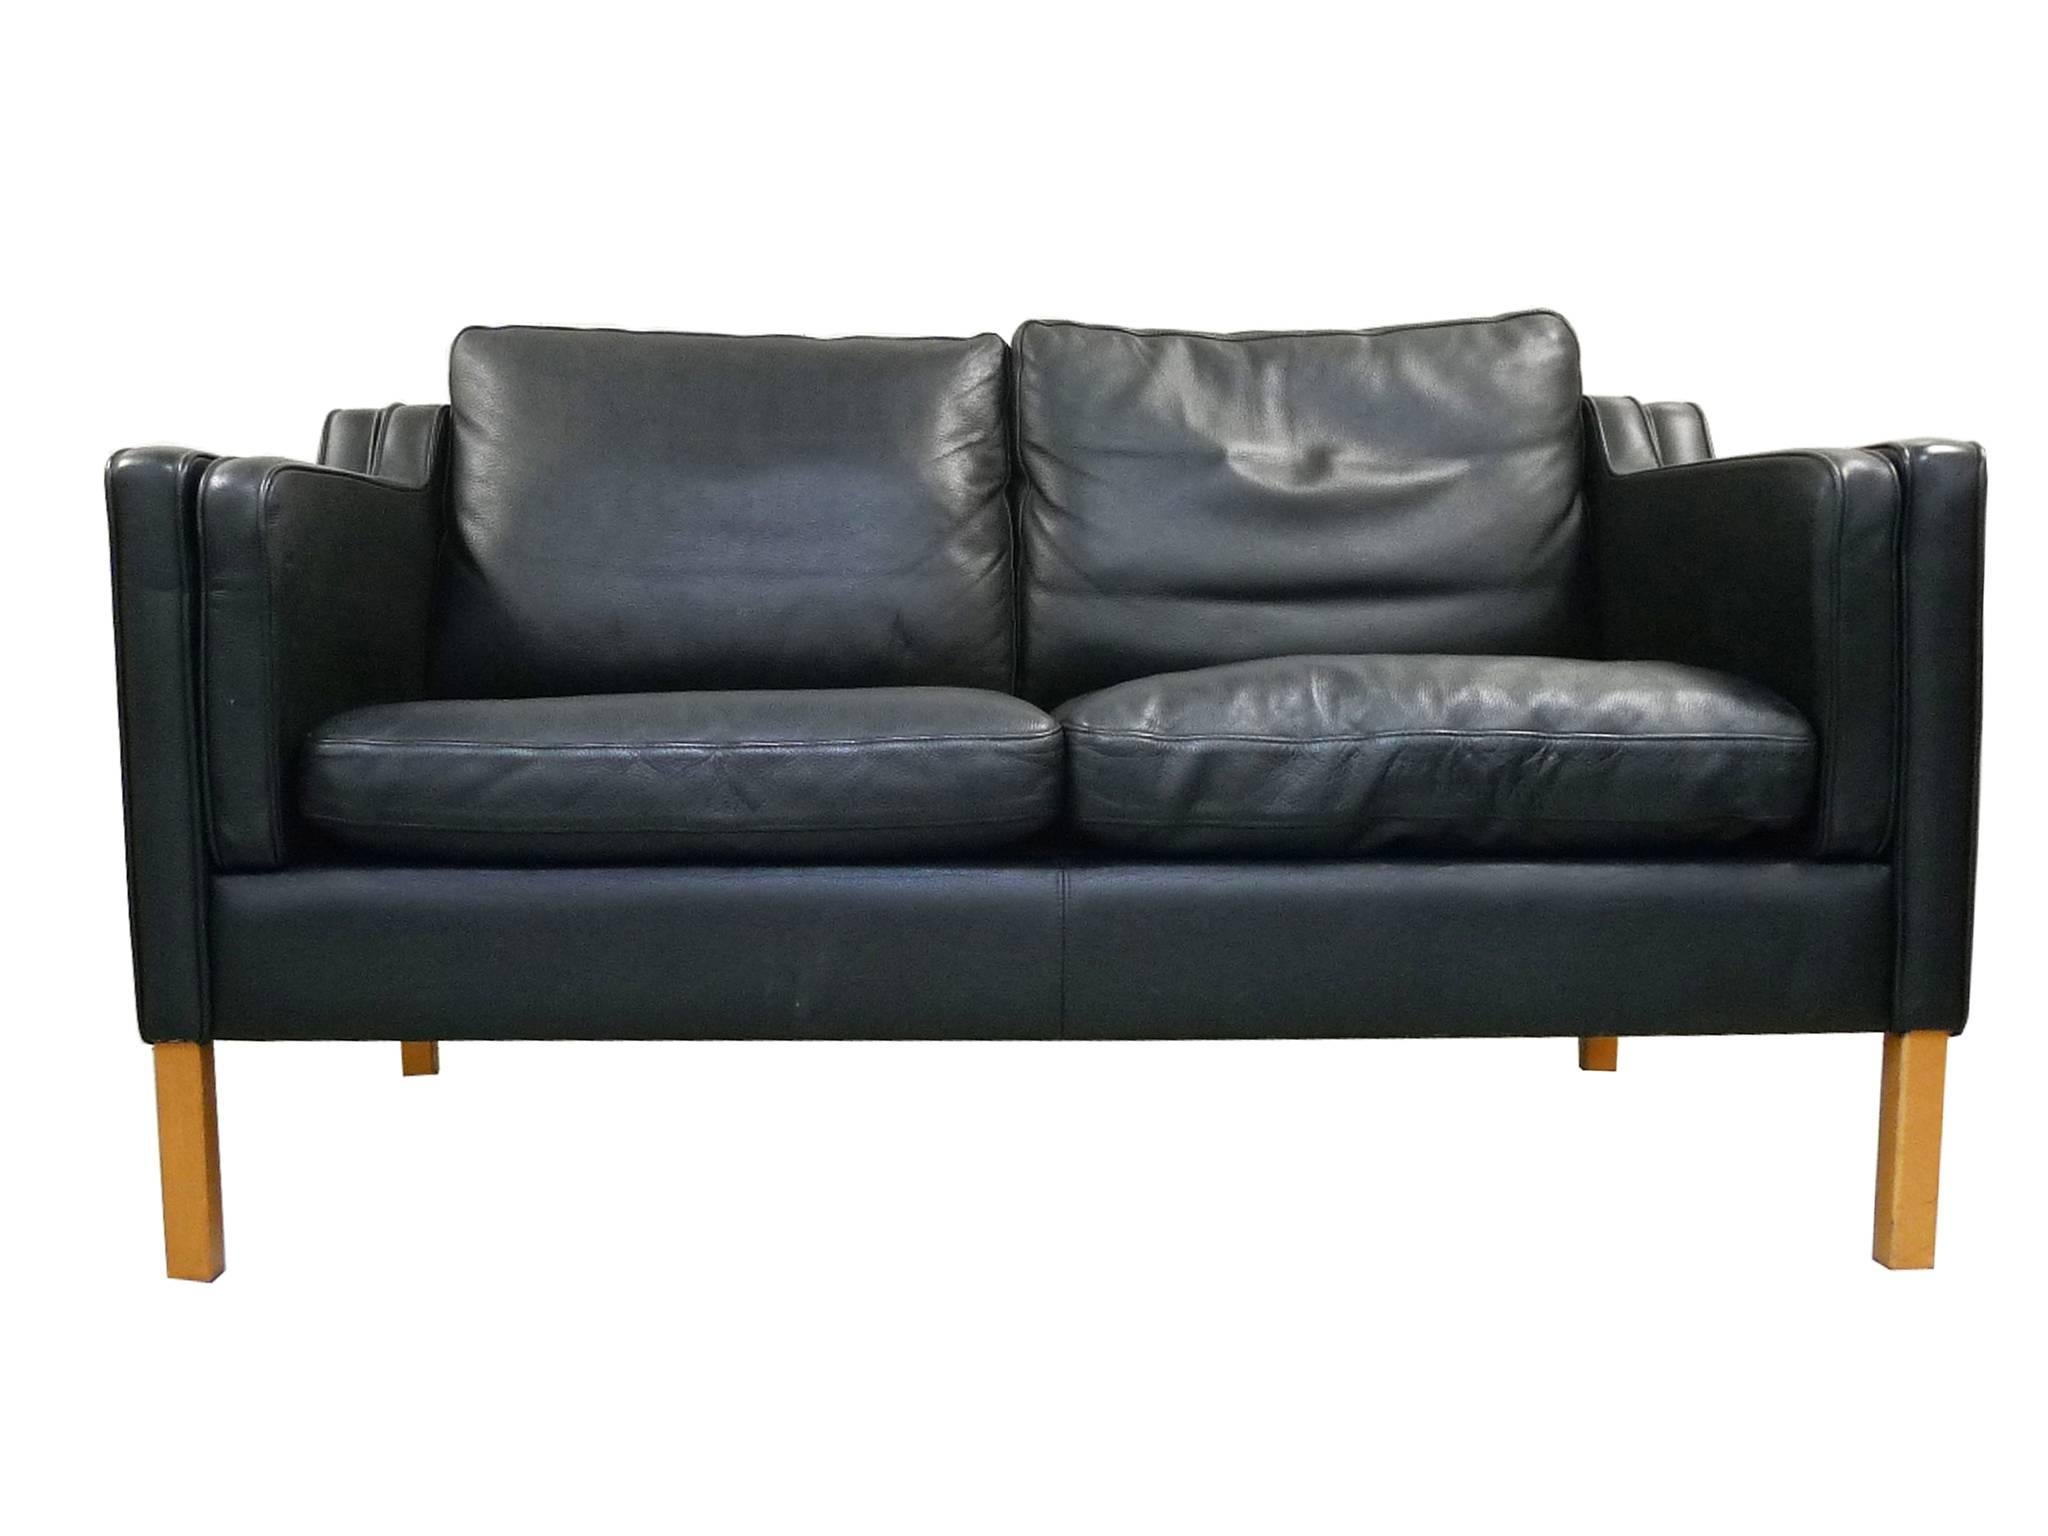 These three settees are in the style of Børge Mogensen and were manufactured by Stouby. Their design is one of clean lines and soft, rounded edges. The upholstery is a well-aged black leather, while the frame is beech wood. These settees have a low